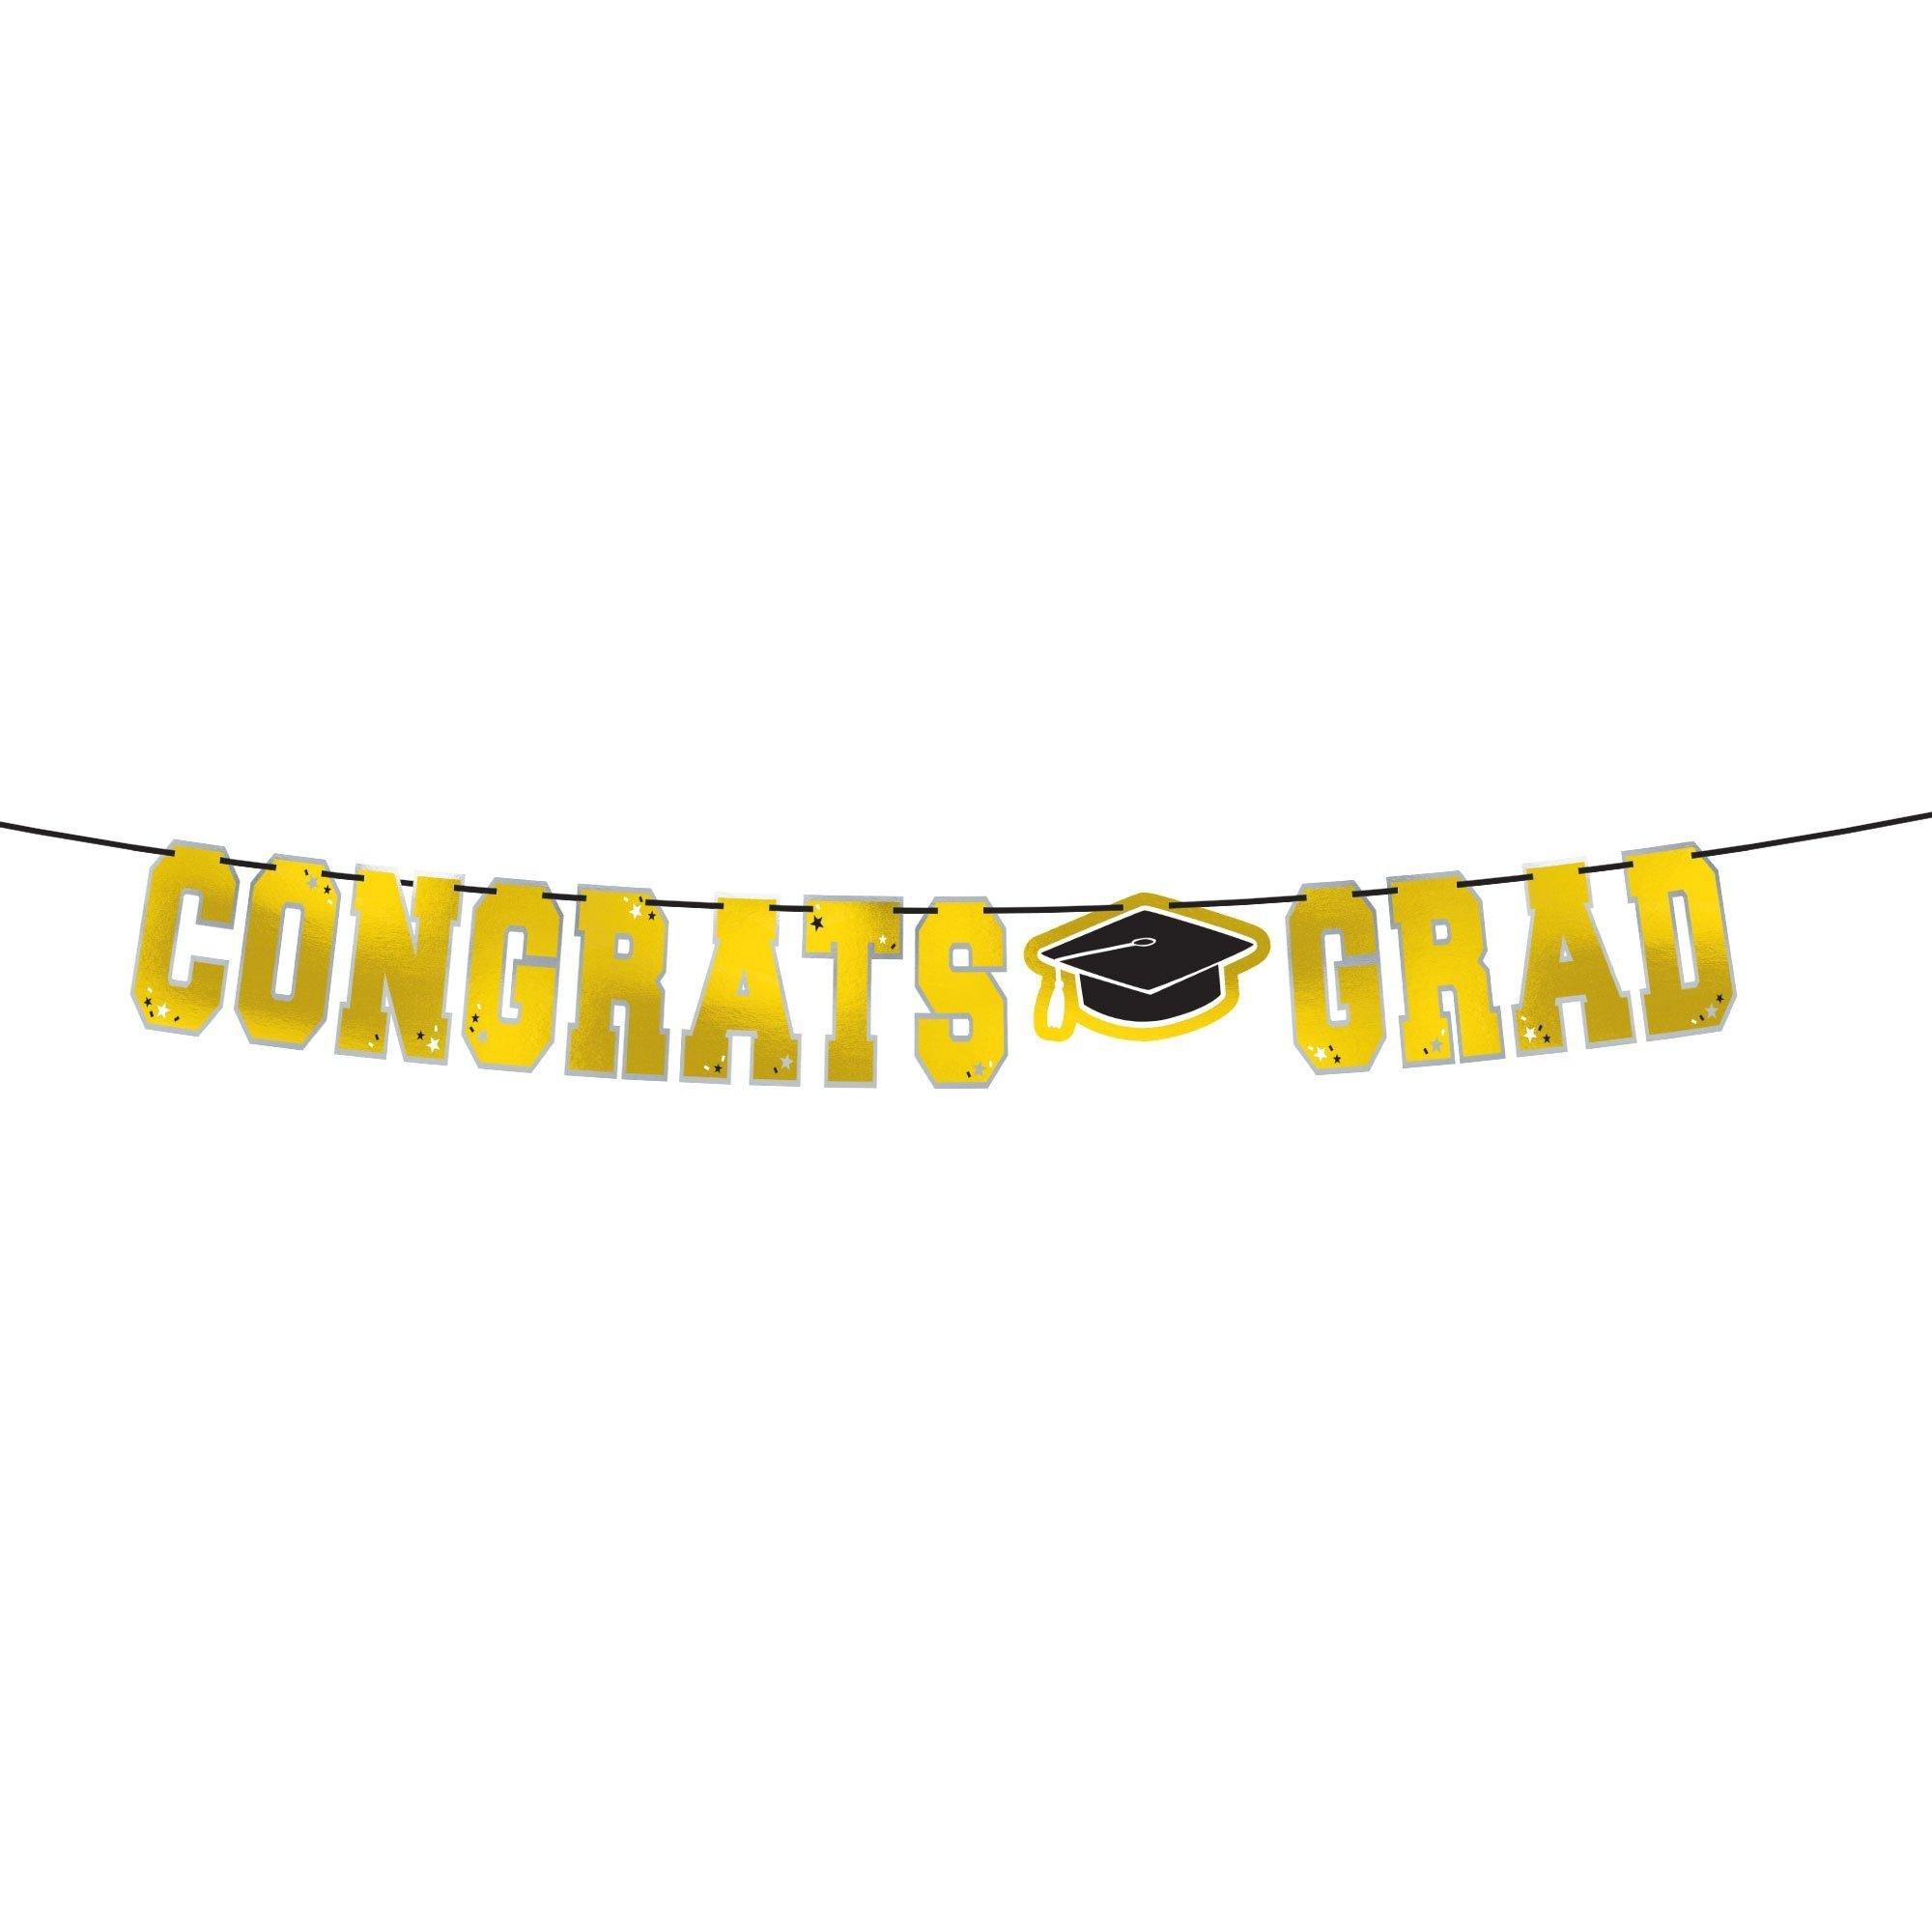 Graduation Party Supplies Kit for 60 with Decorations, Banners, Plates, Napkins, Cups - Yellow Congrats Grad